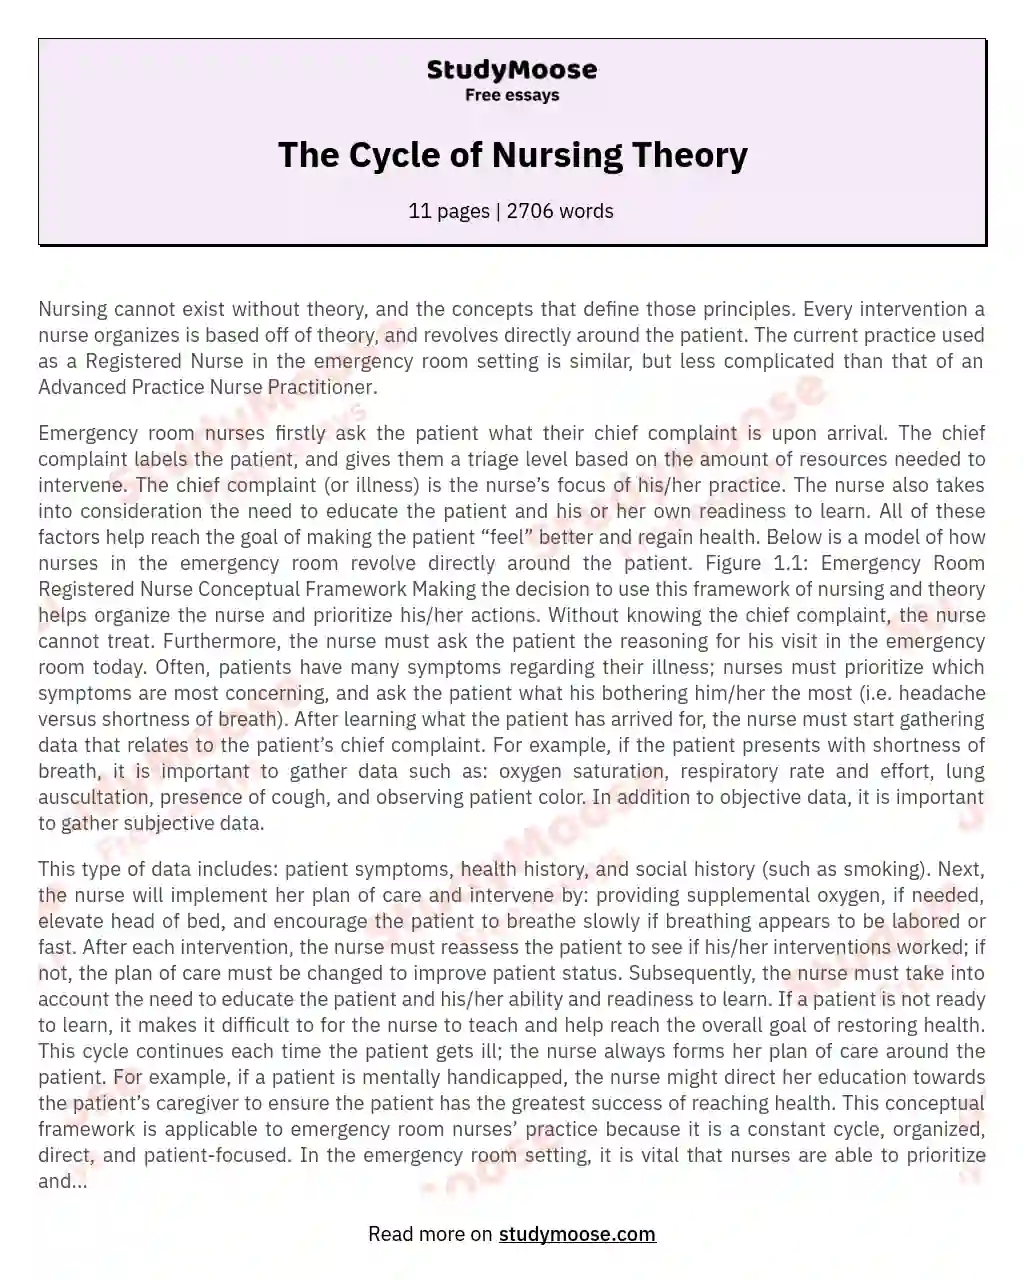 Emergency Room Nursing: Prioritizing Patient Care and Interventions essay